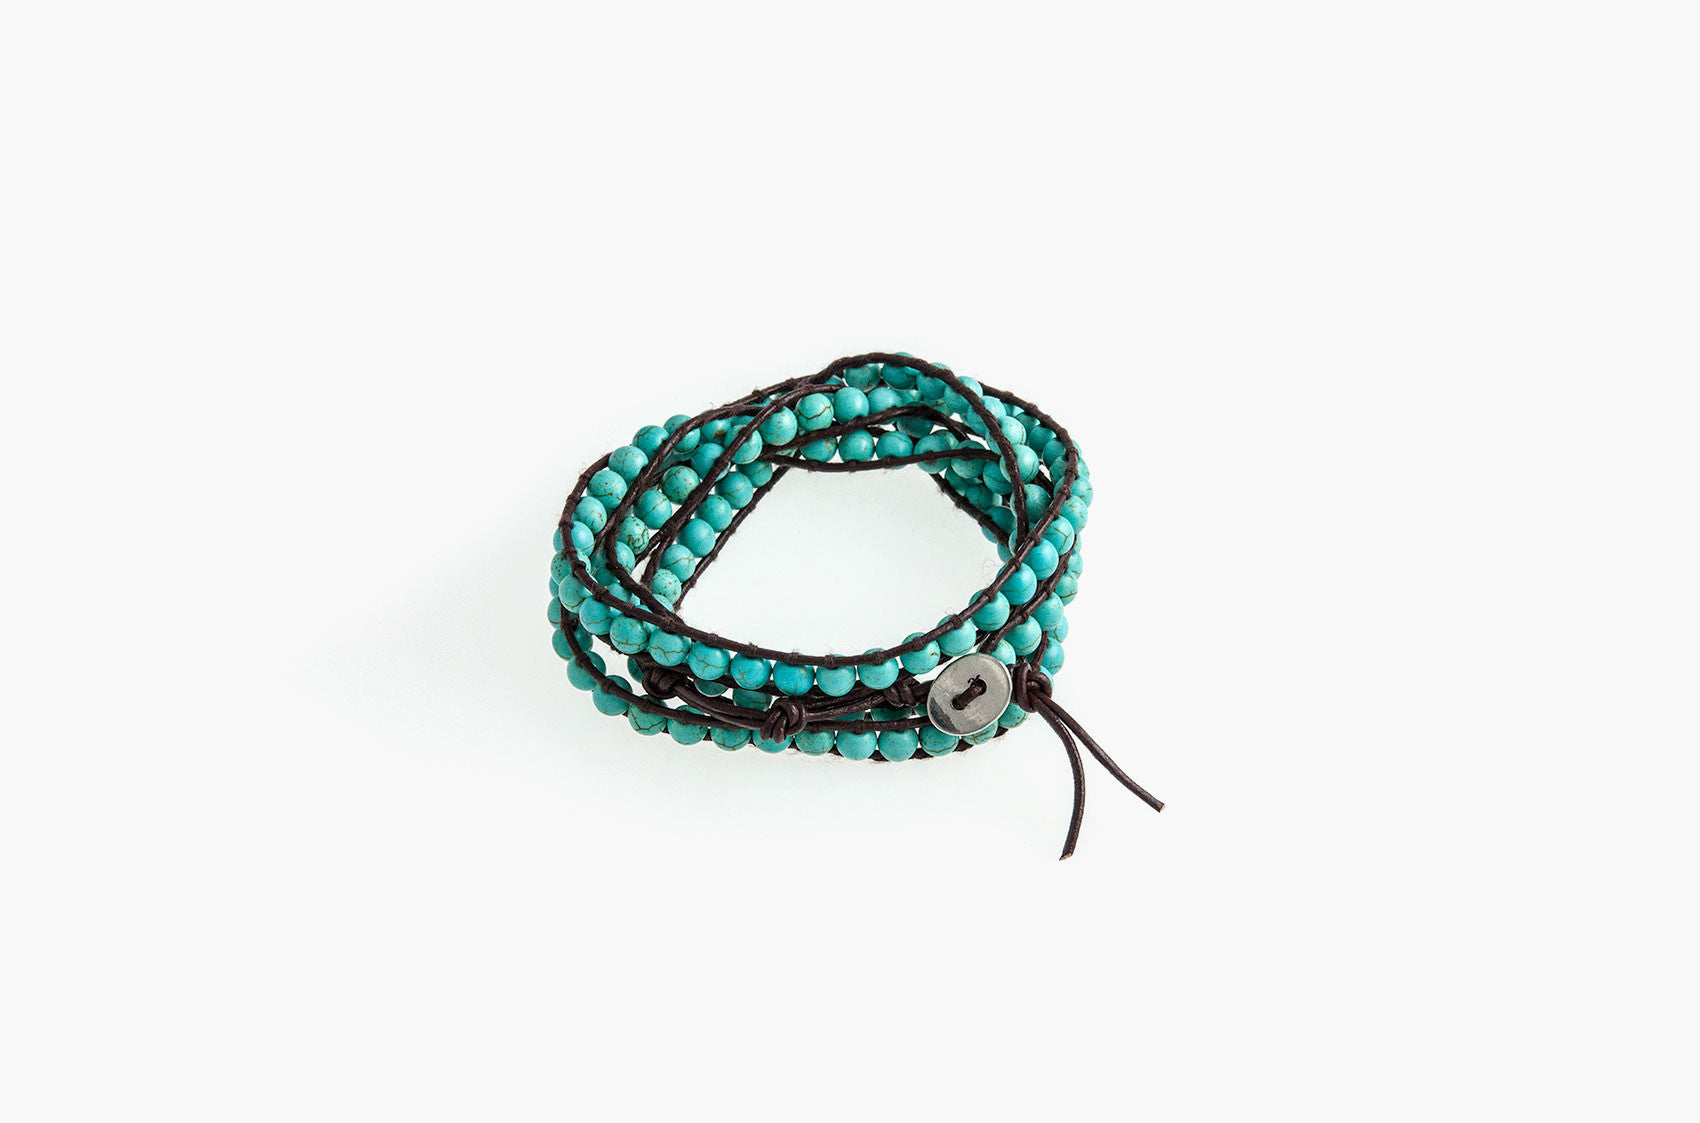 Turquoise wrap bracelet with brown leather